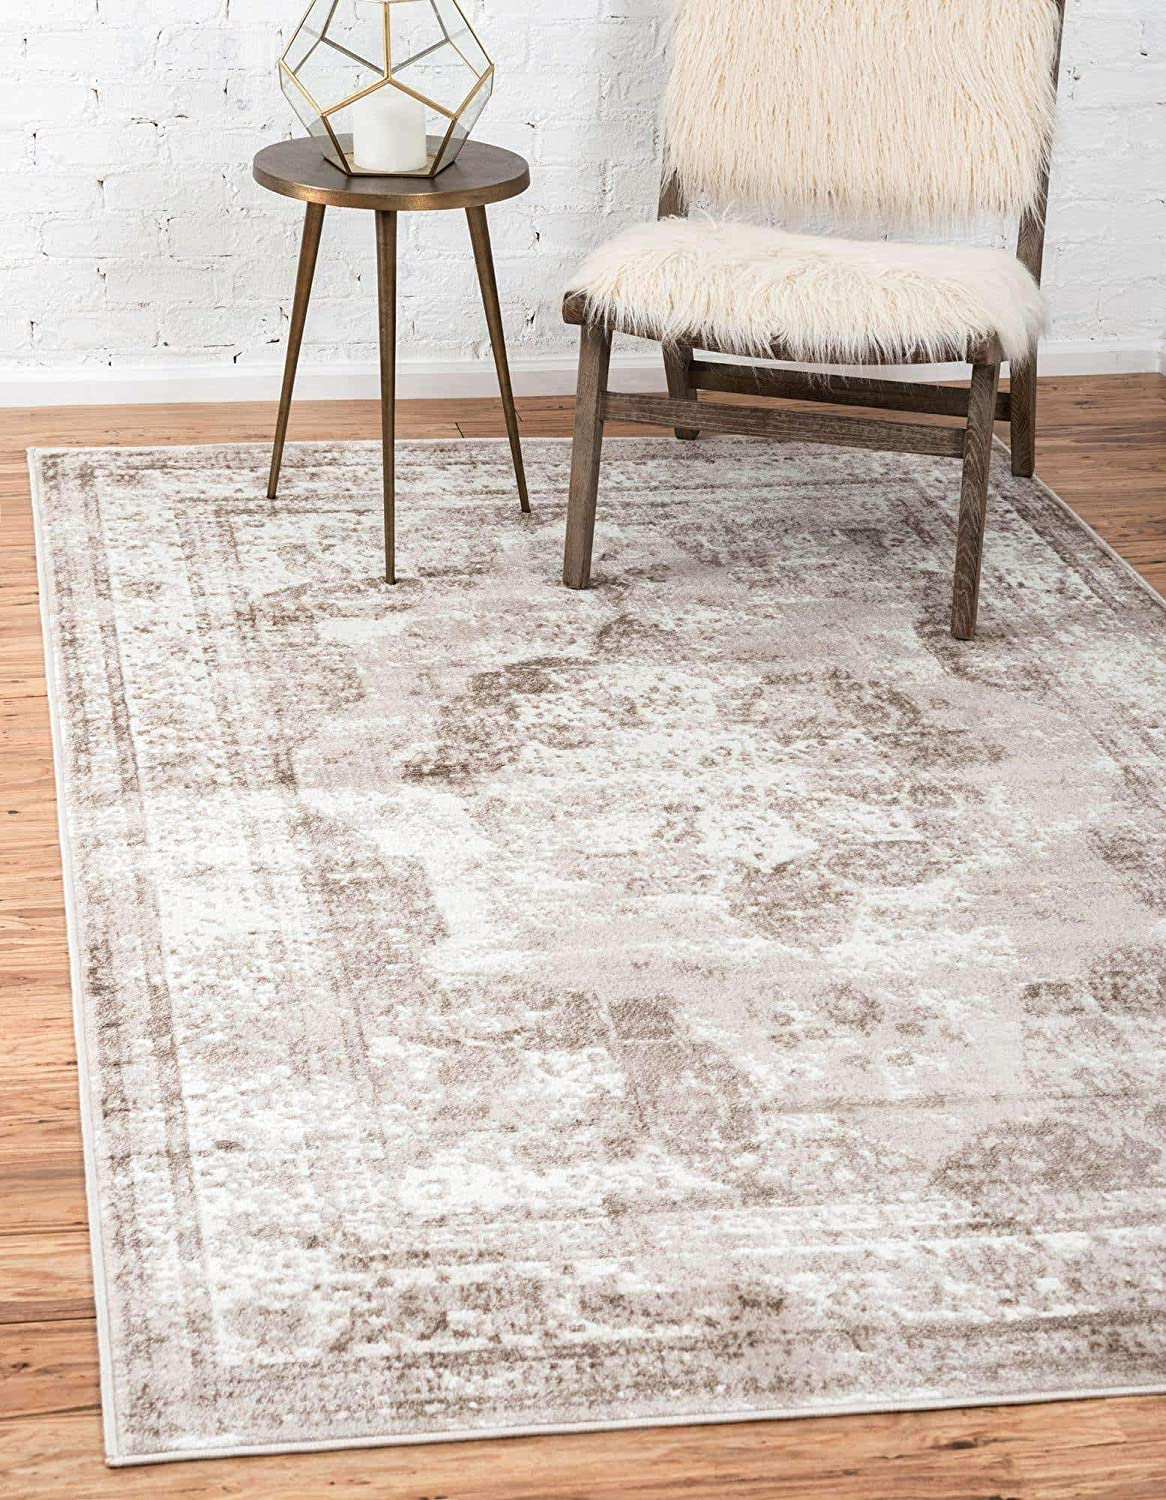 Unique Loom Sofia Collection Area Traditional Vintage Rug, French Inspired Perfect for All Home Décor, 4' 0 x 6' 0 Rectangular, Light Brown/Tan